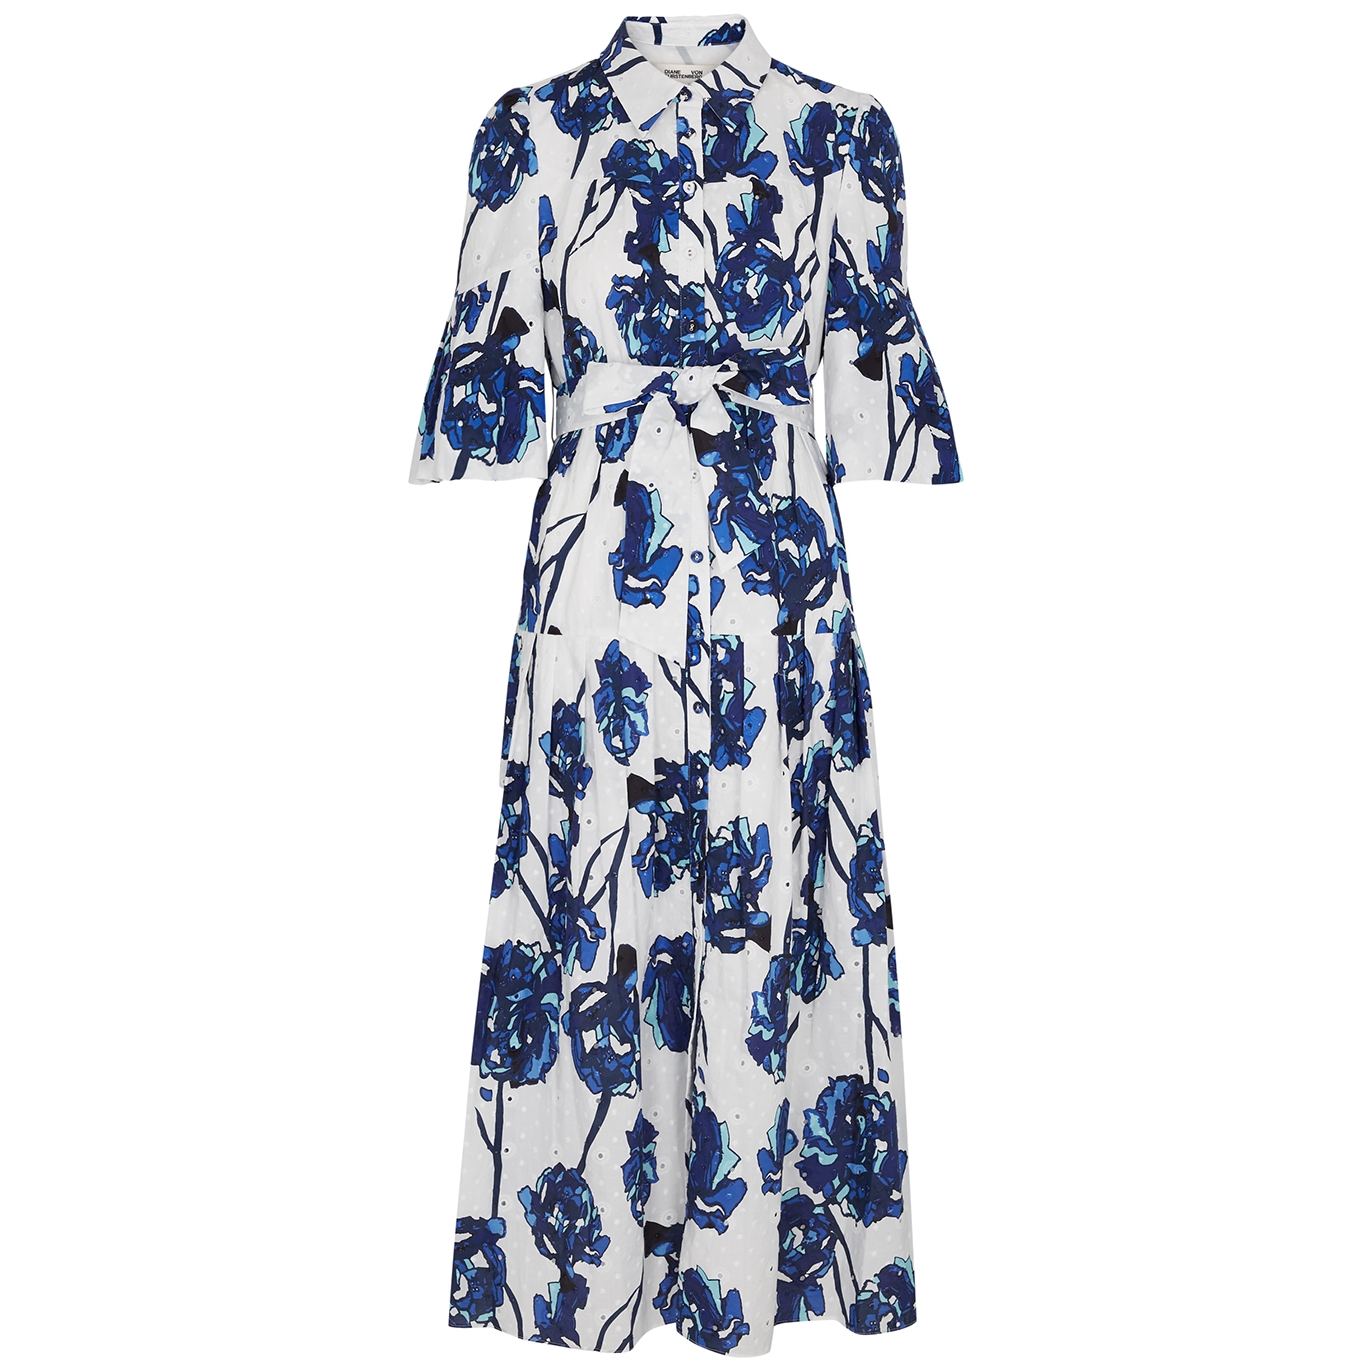 DIANE VON FURSTENBERG DIANE VON FURSTENBERG AVEENA PRINTED BRODERIE ANGLAISE COTTON SHIRT DRESS